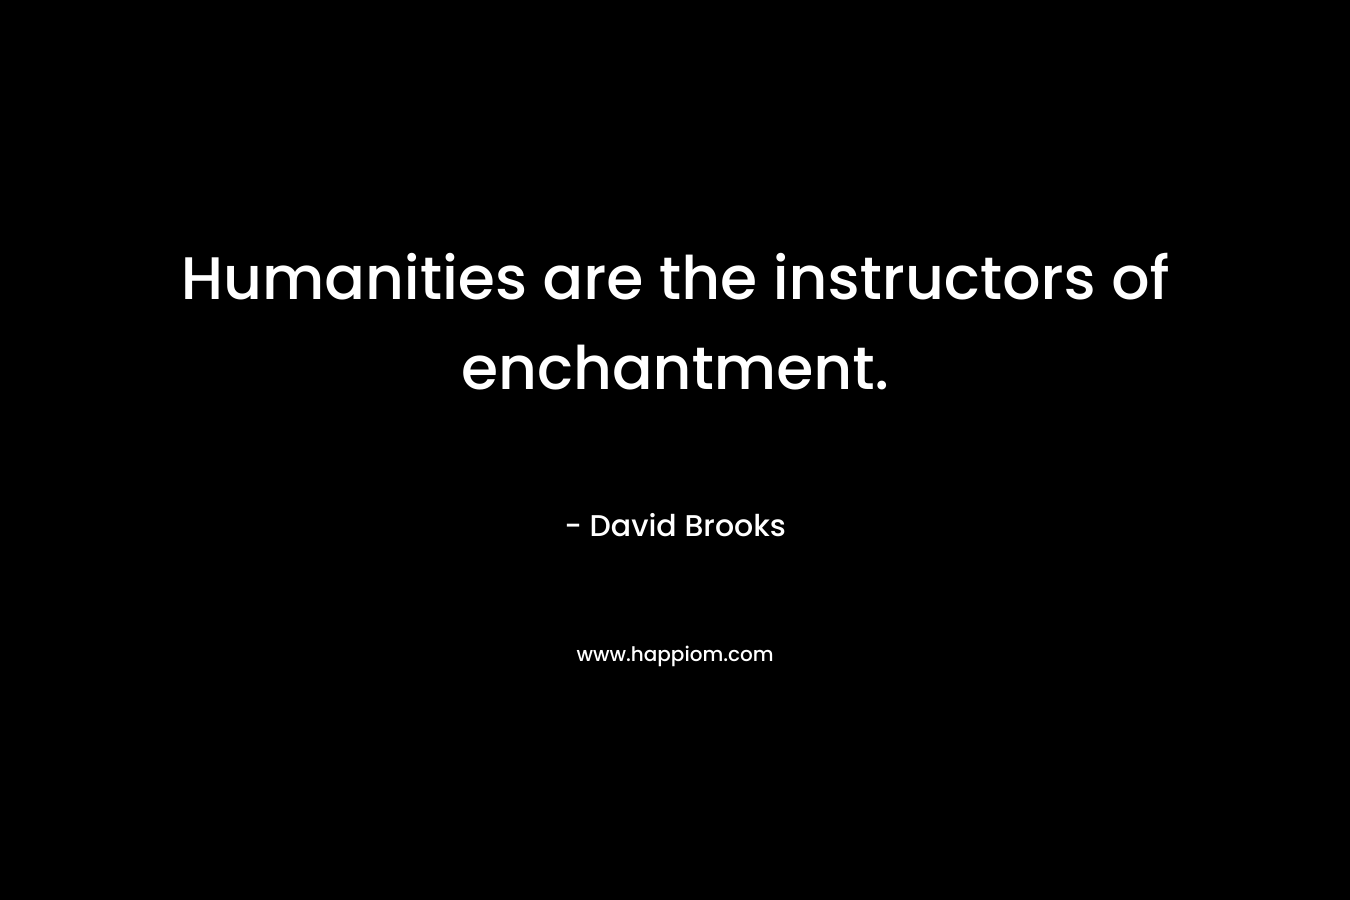 Humanities are the instructors of enchantment. – David Brooks